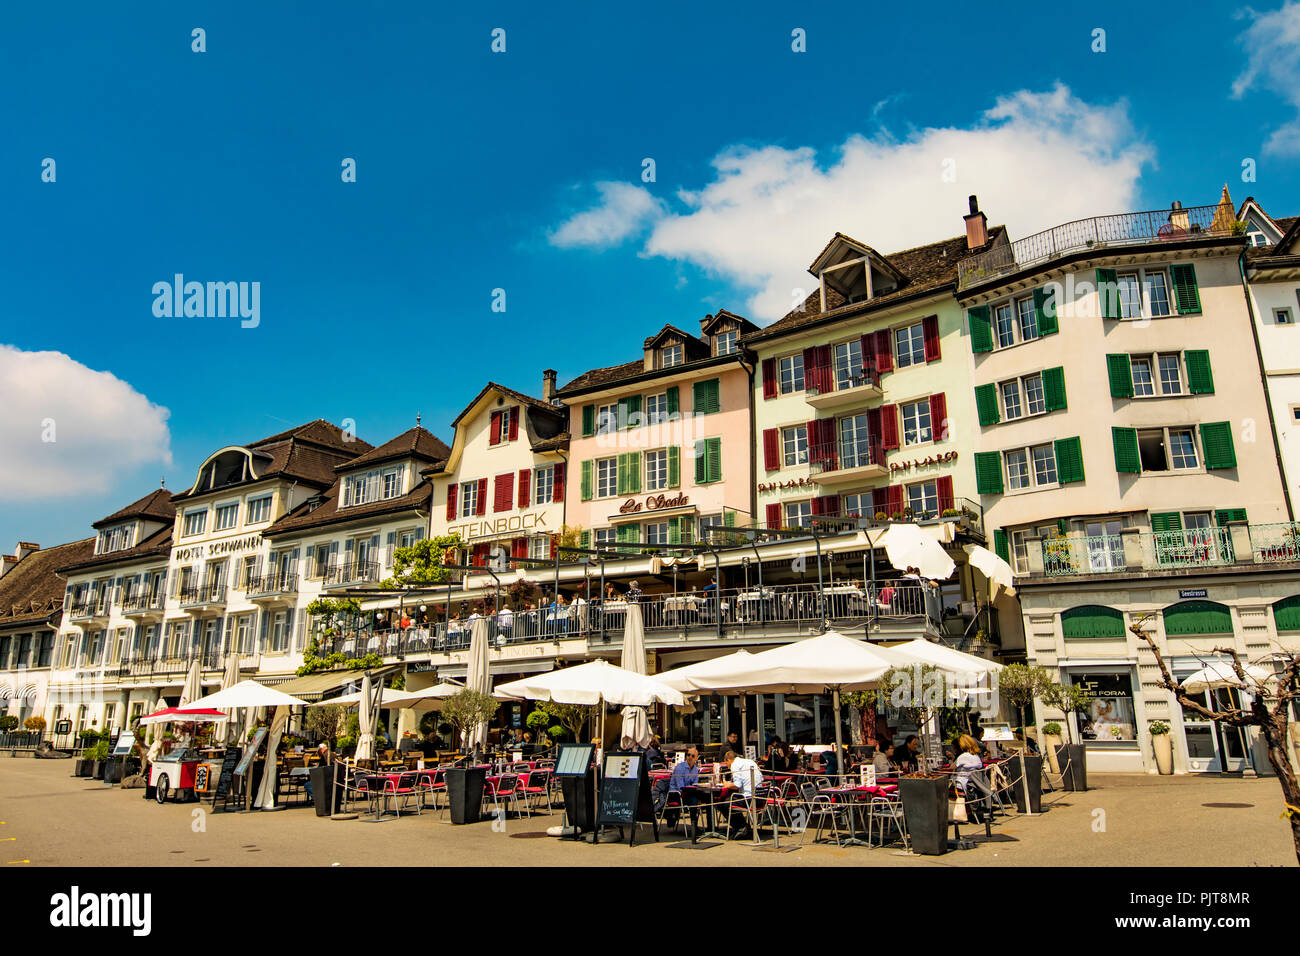 RAPPERSWIL, SWITZERLAND - MAY 18, 2018: Unidentified people sitting in restaurants in Rapperswil, Switzerland. This town located on the upper end of L Stock Photo